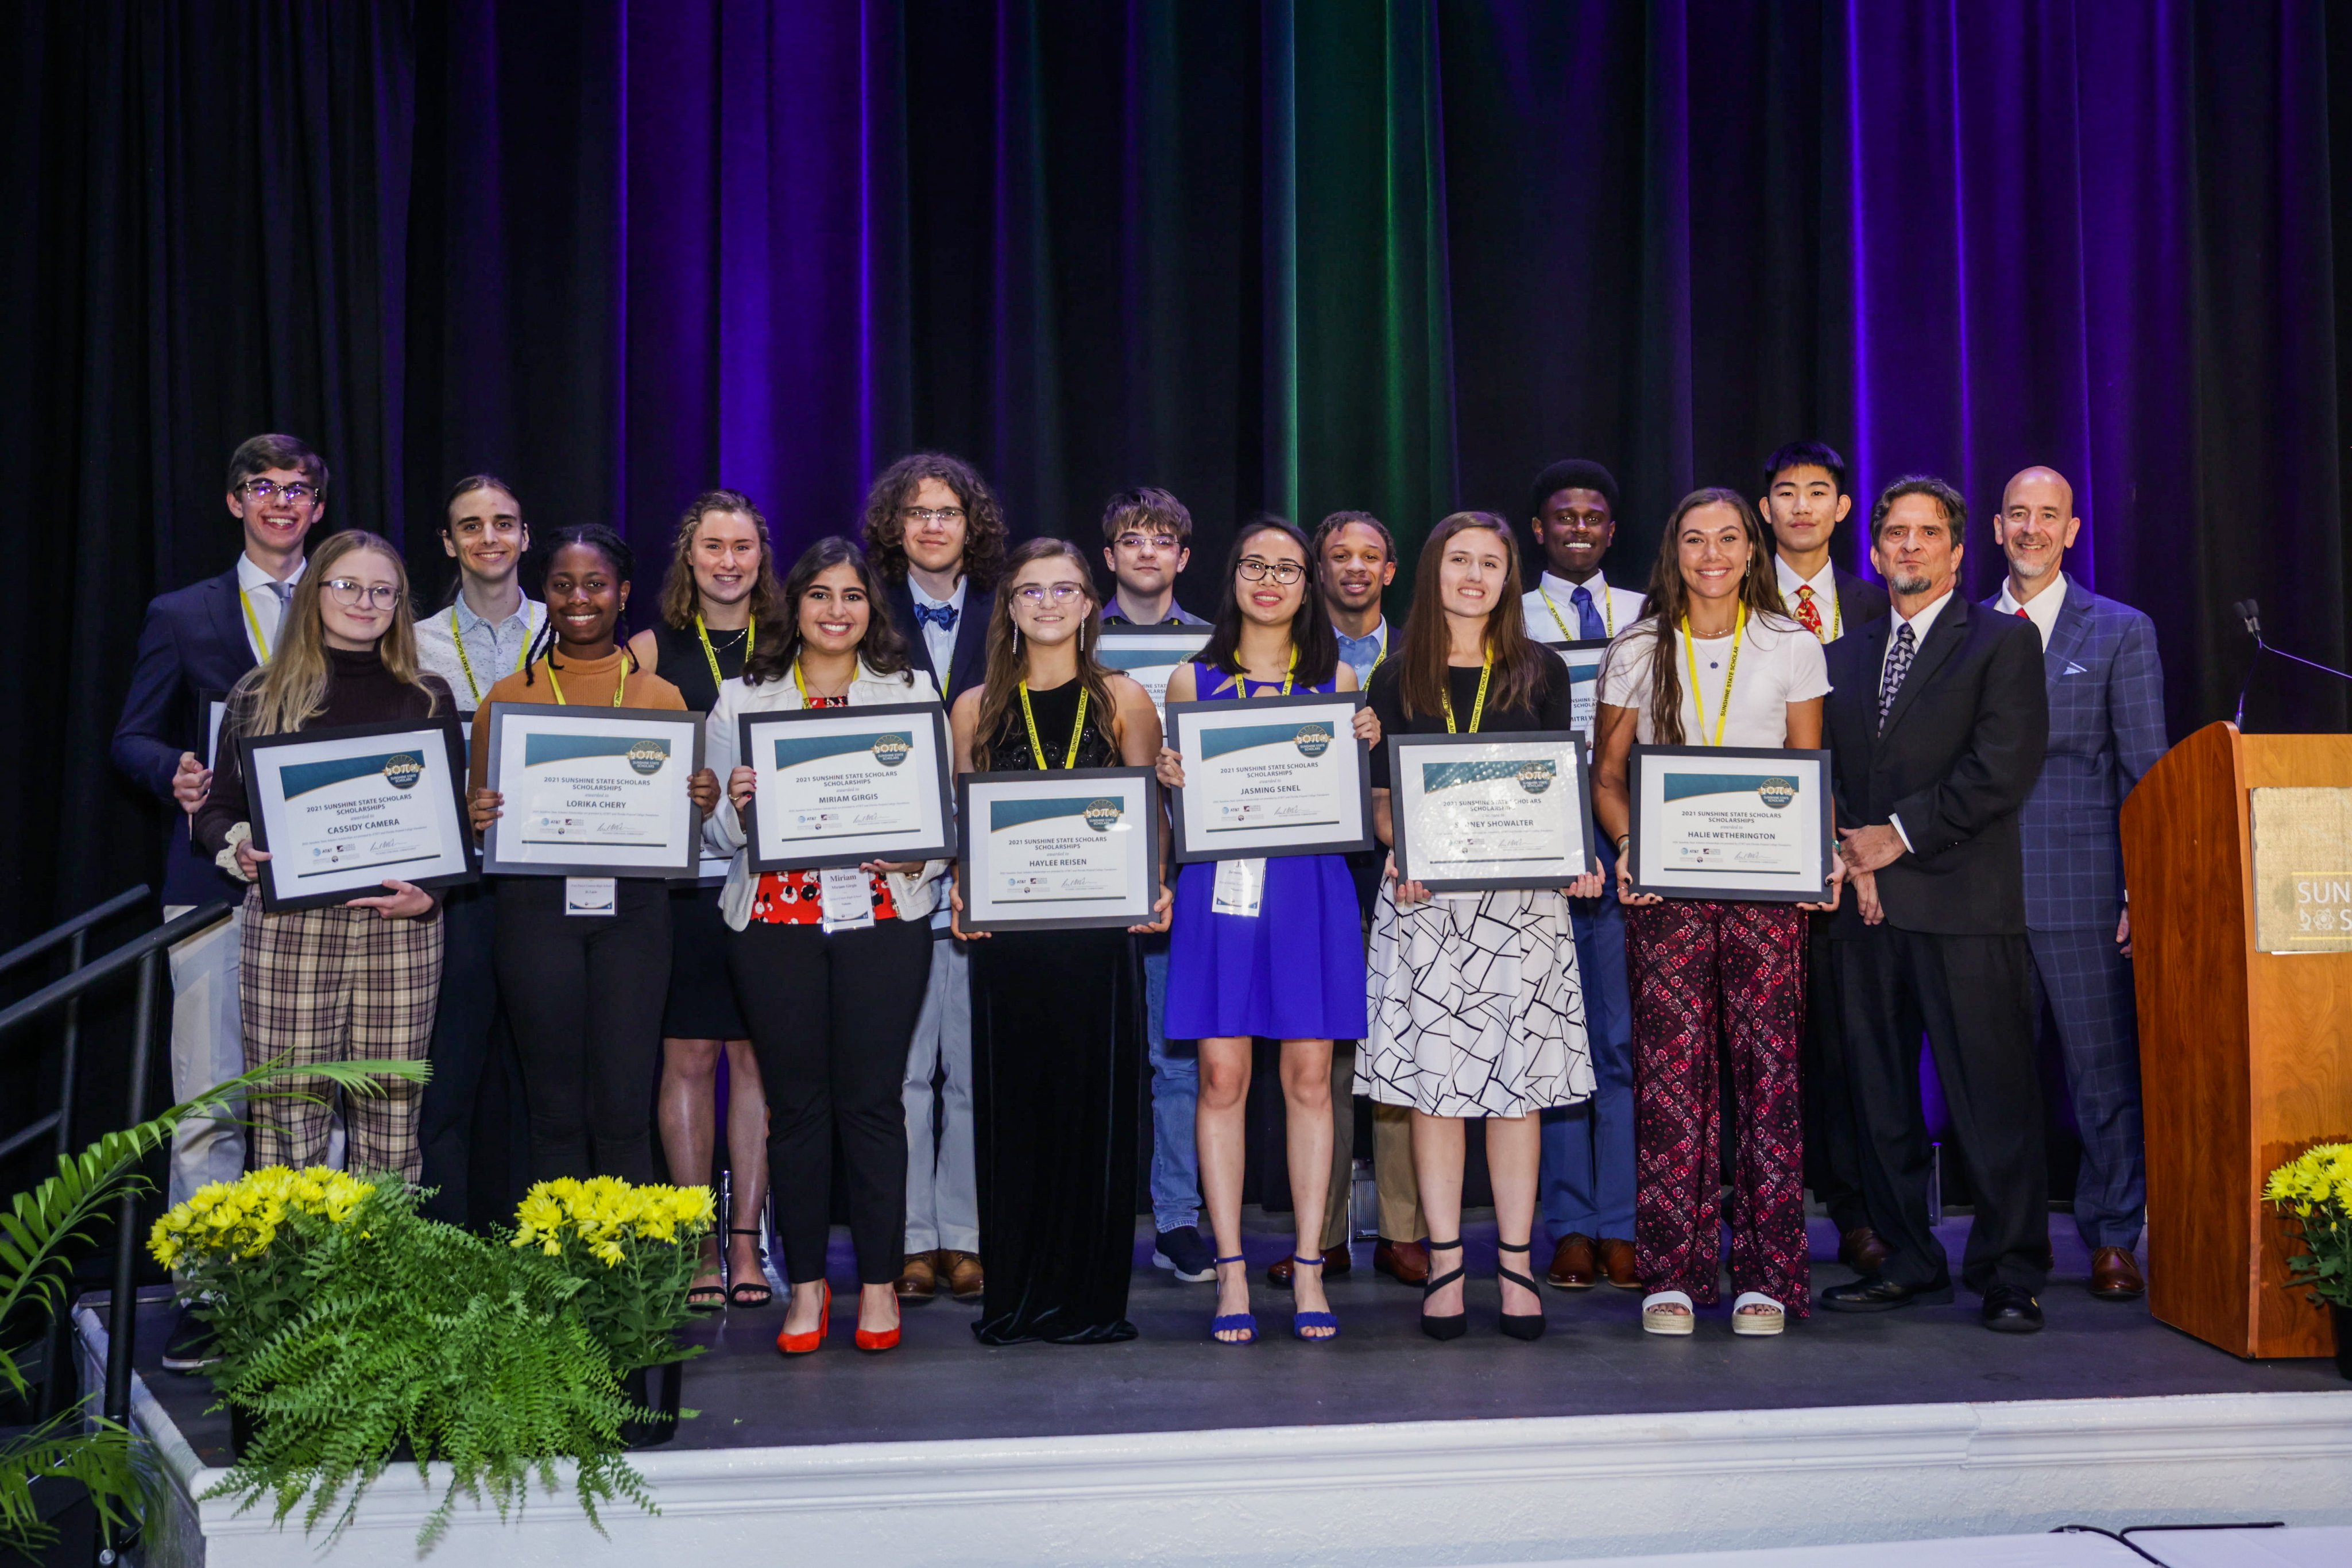 Fifteen scholars were recognized with the inaugural Sunshine State Scholarship presented by AT&T and Florida Prepaid College Foundation.